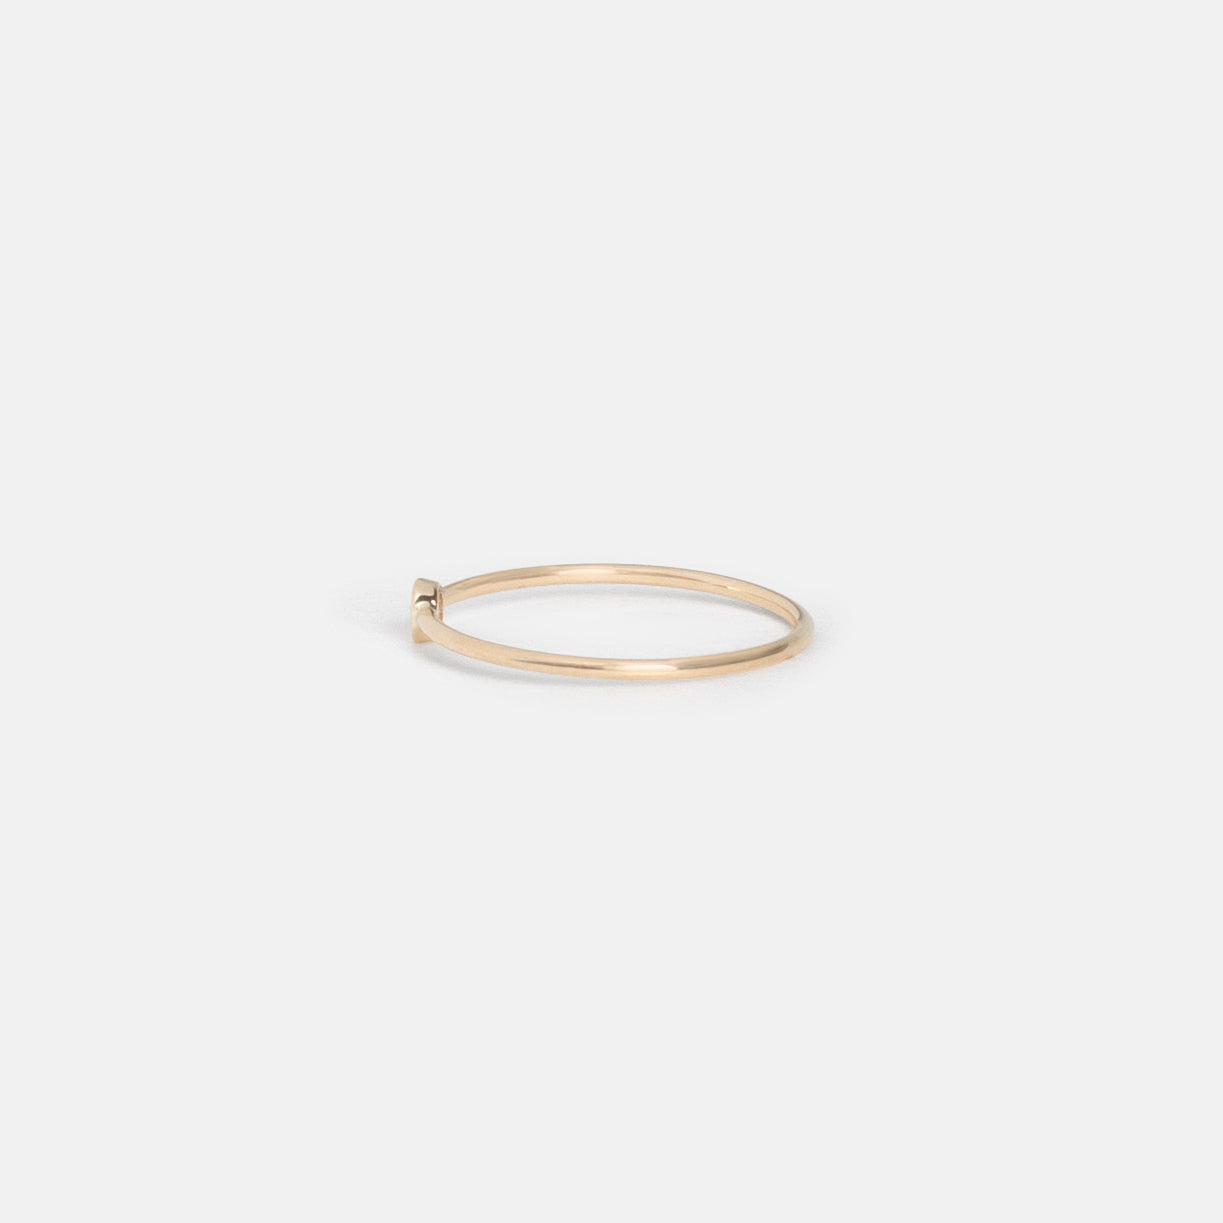 Large Kaya Ring in 14k Gold set with White Diamond by SHW Fine Jewelry